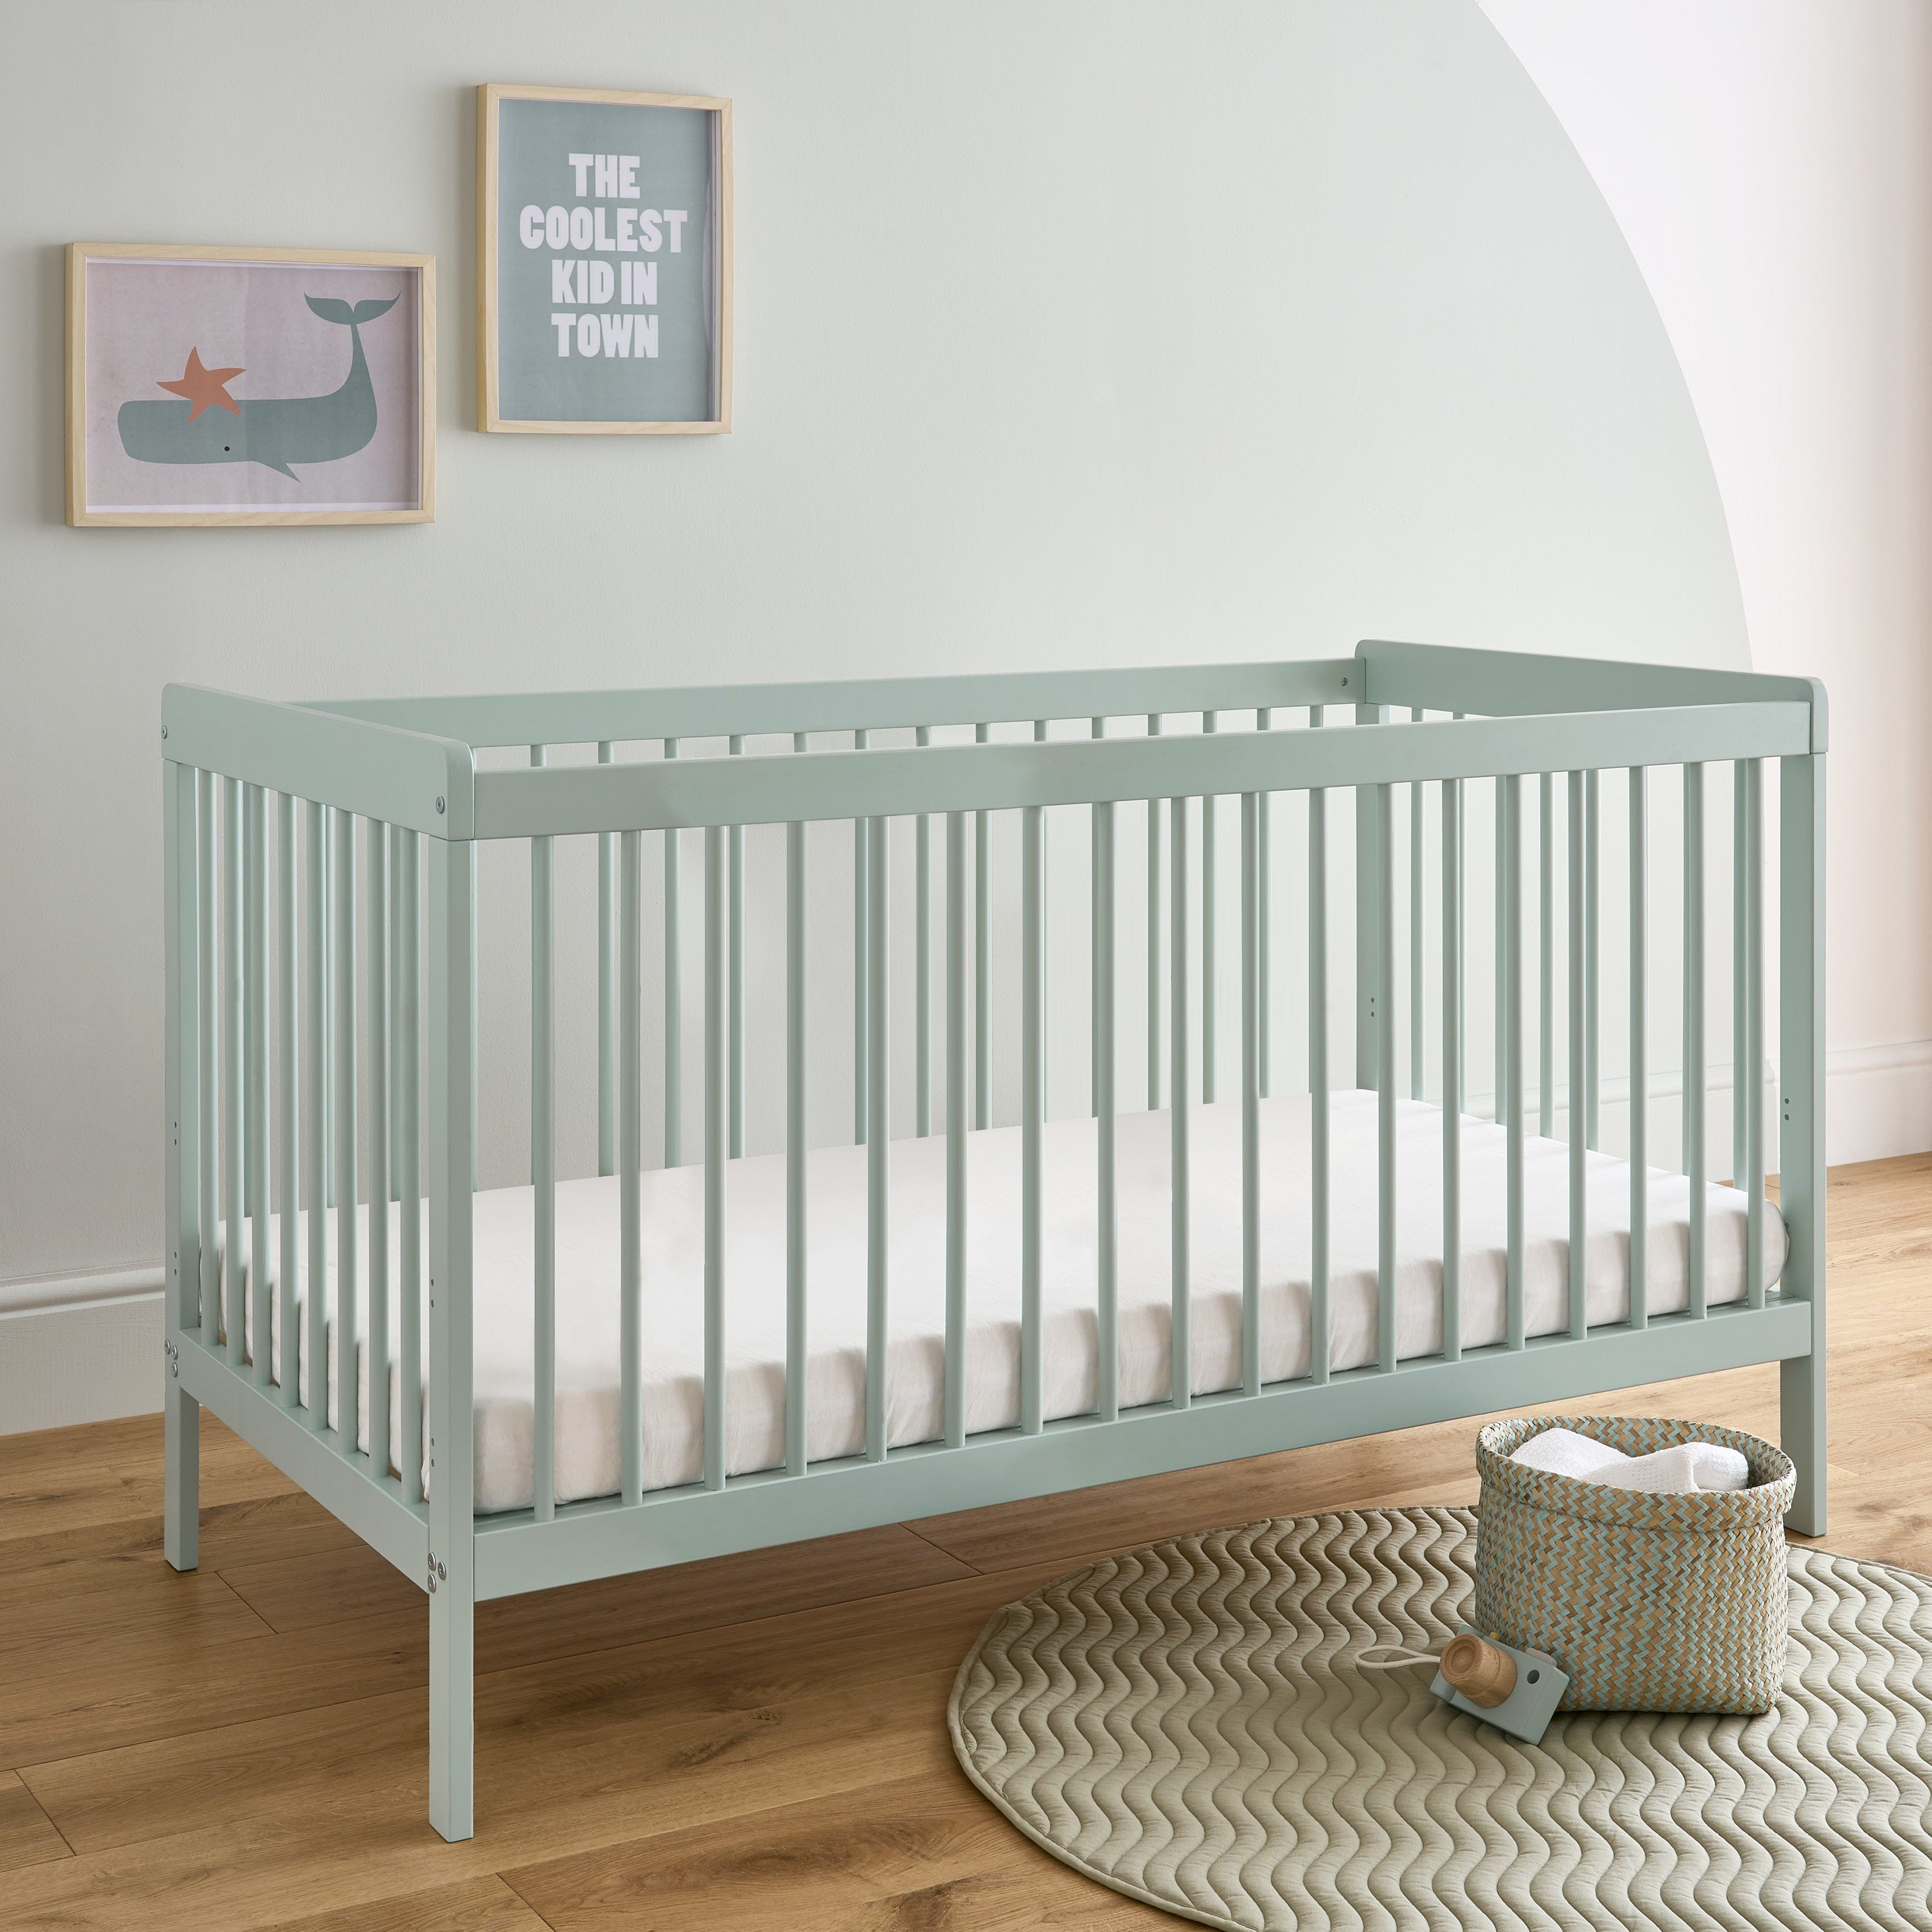 CuddleCo Nola Cot Bed in Sage Green Cot Beds